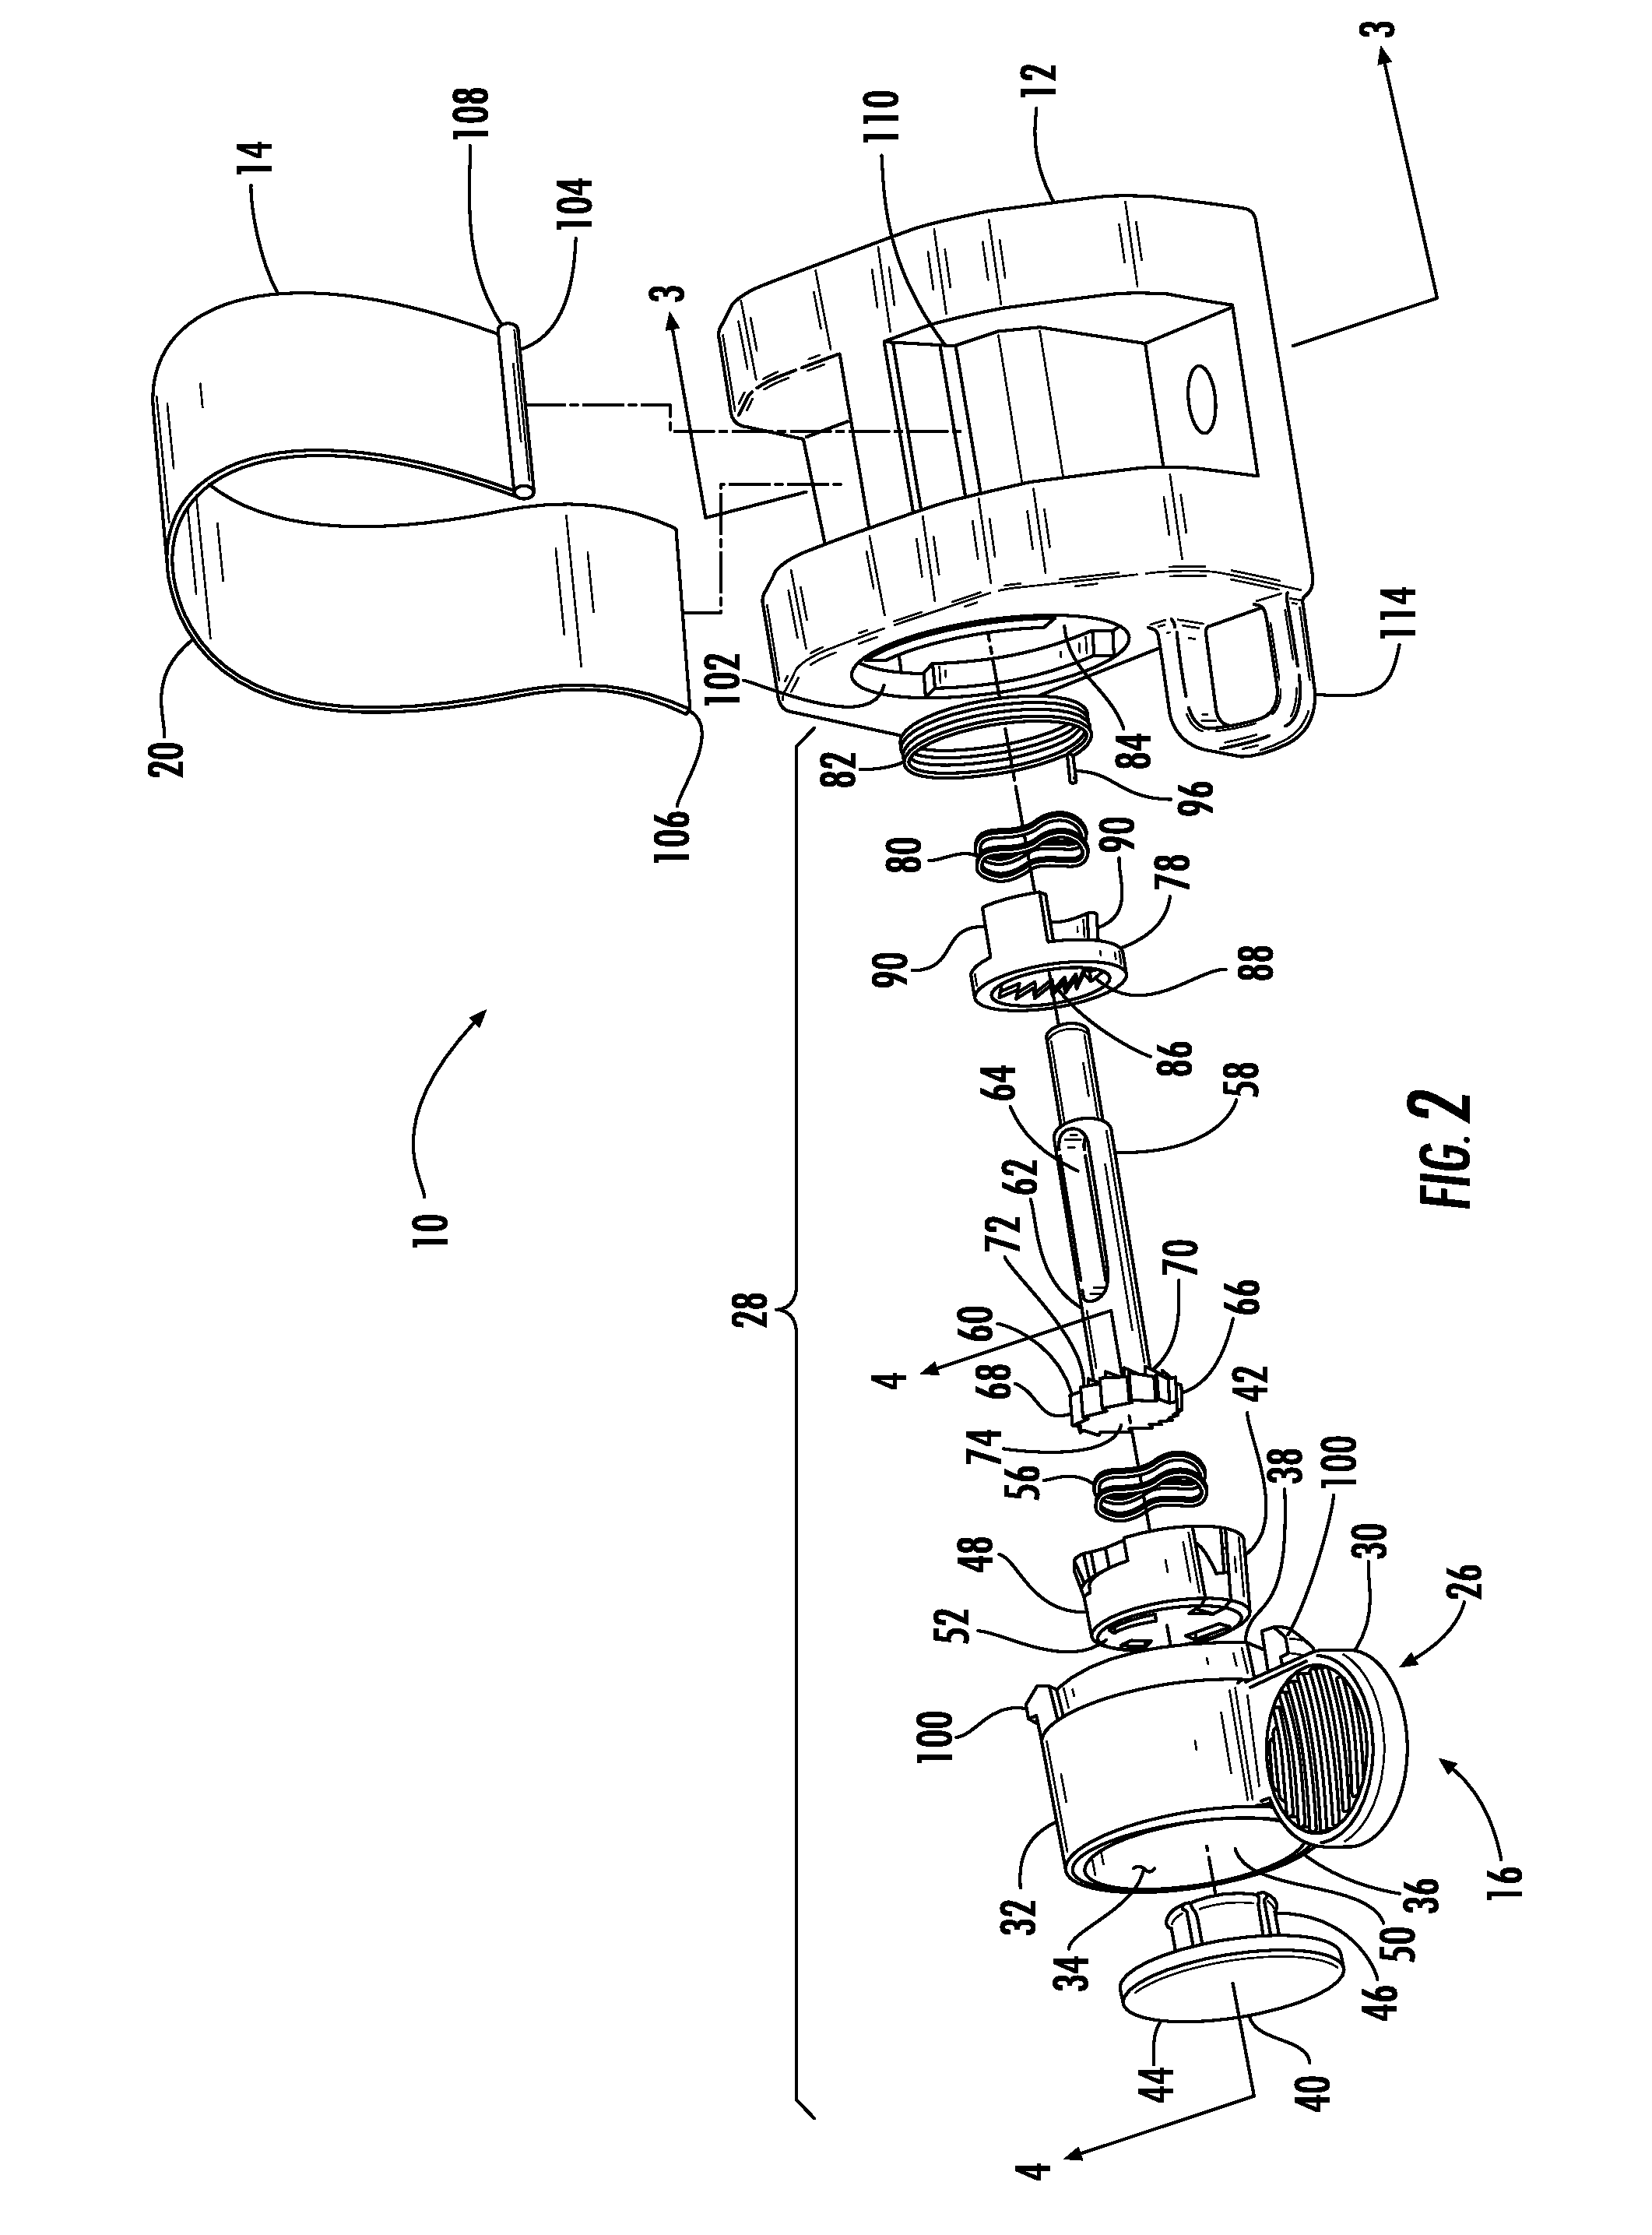 Strain Relief Device and Method for Fiber Optic Cables